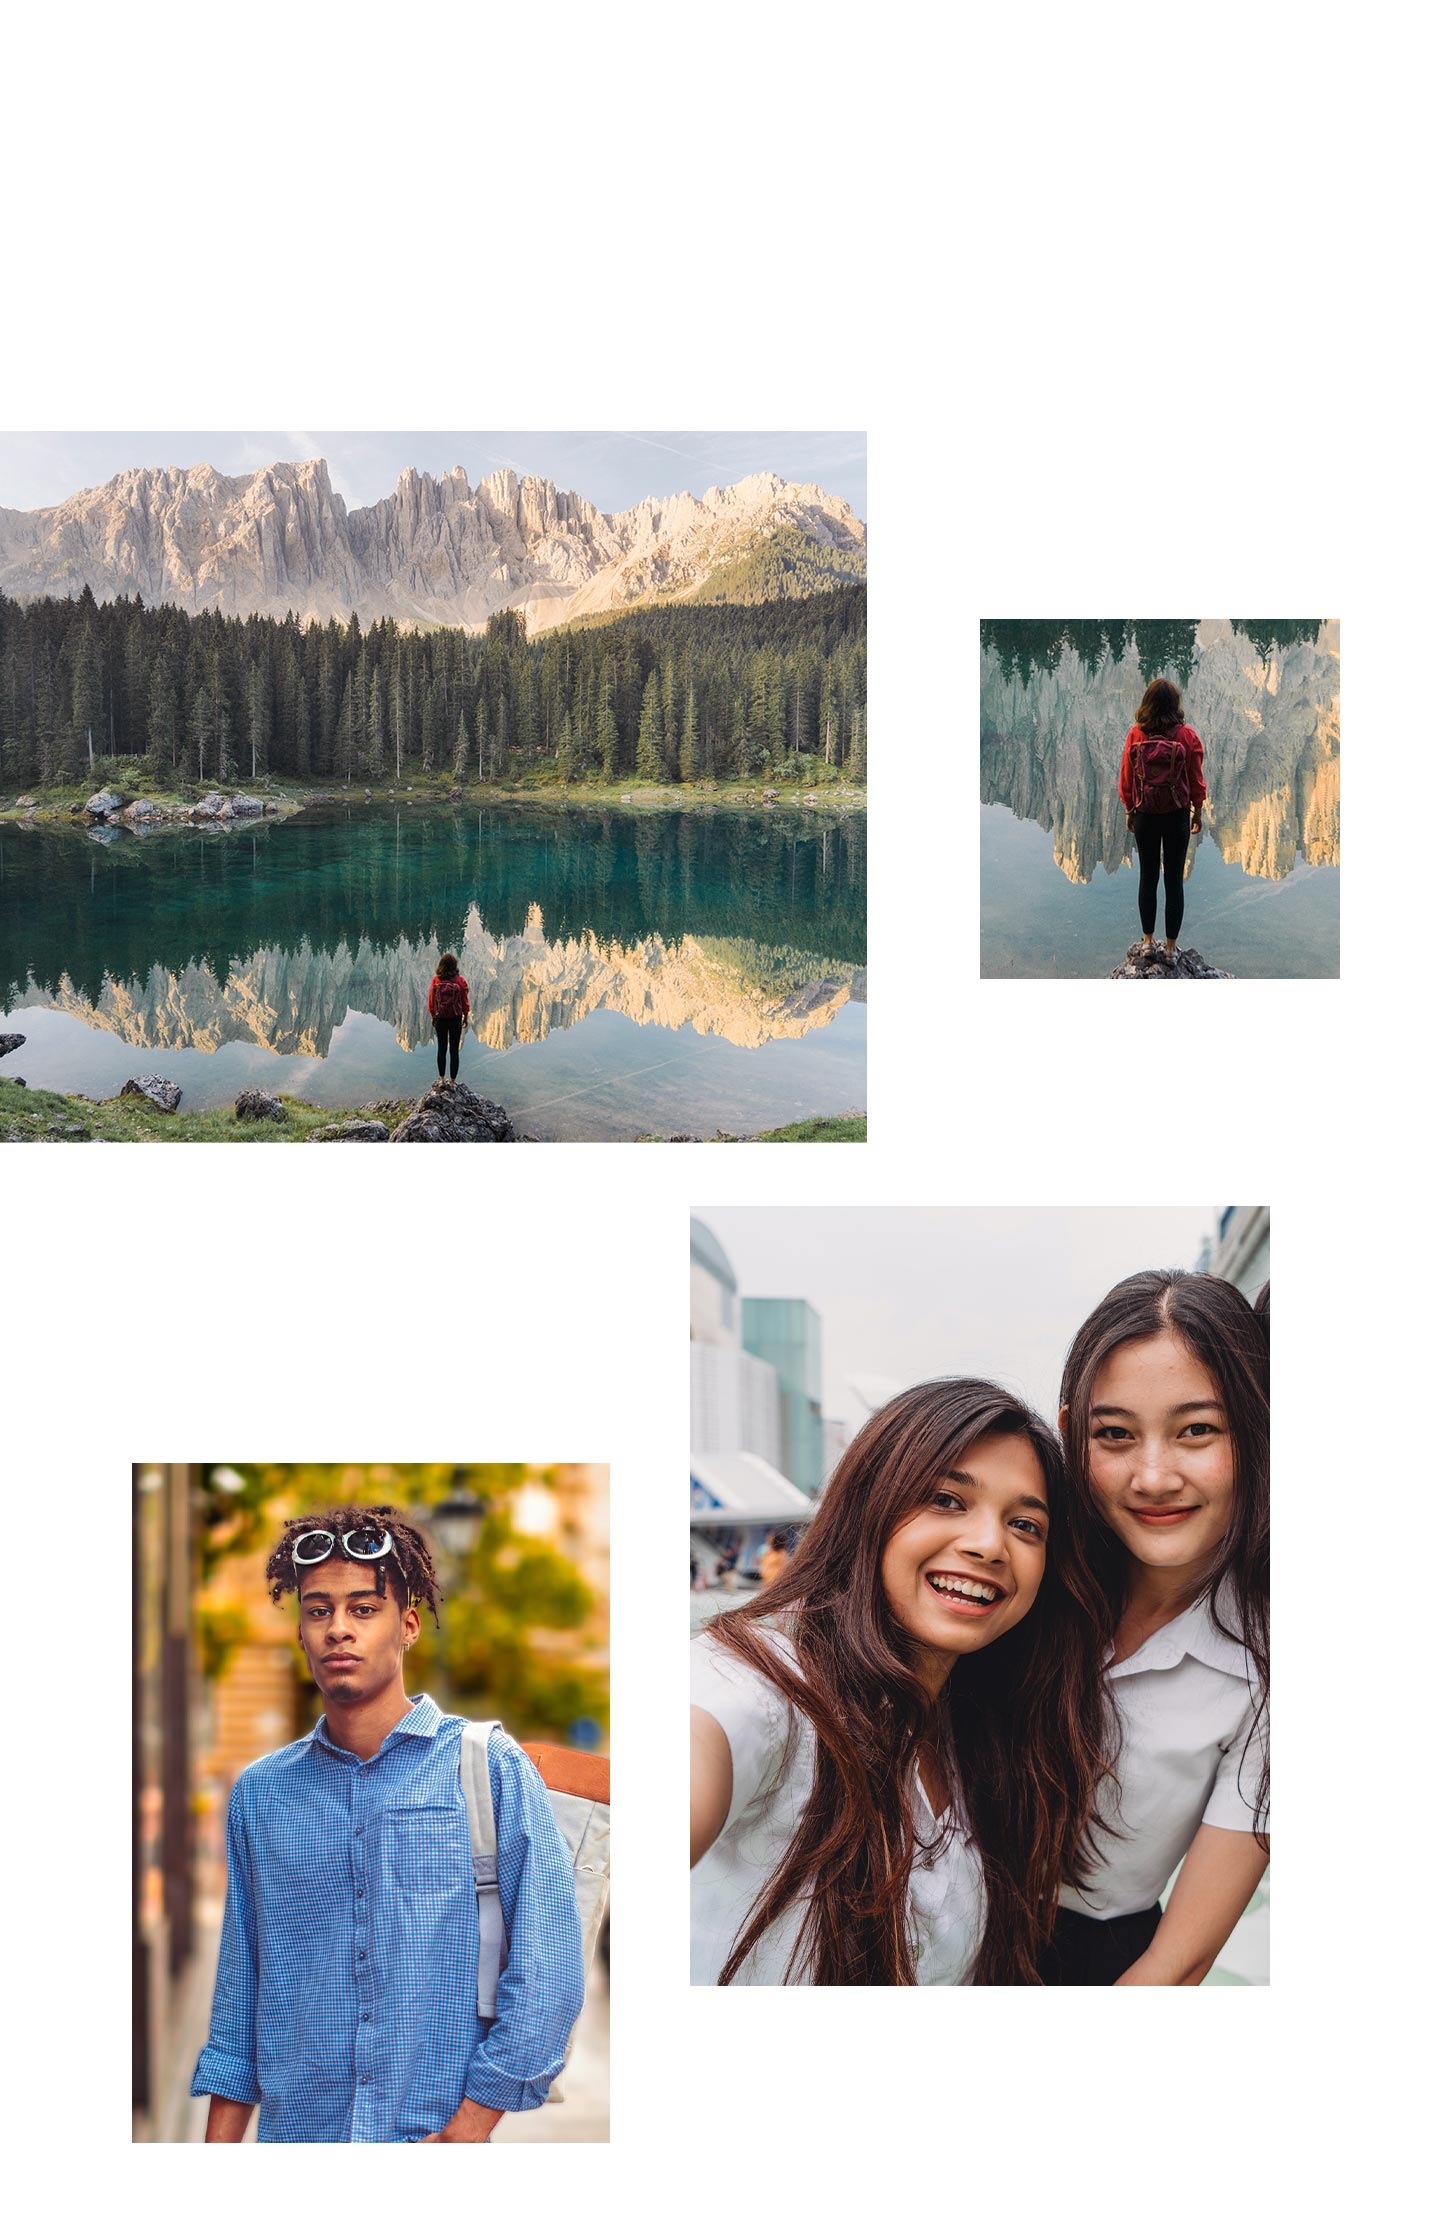 Top left :  A landscape of mountains and forests in the background and a lake in the foreground. At the very front is a woman facing backwards and standing on top of a rock.Top right : A close up of the woman.Center left : Portrait of a man wearing a blue shirt and white backpack with the background blurred to make the man's features clear and sharp.Center right : A selfie of two girls smiling.